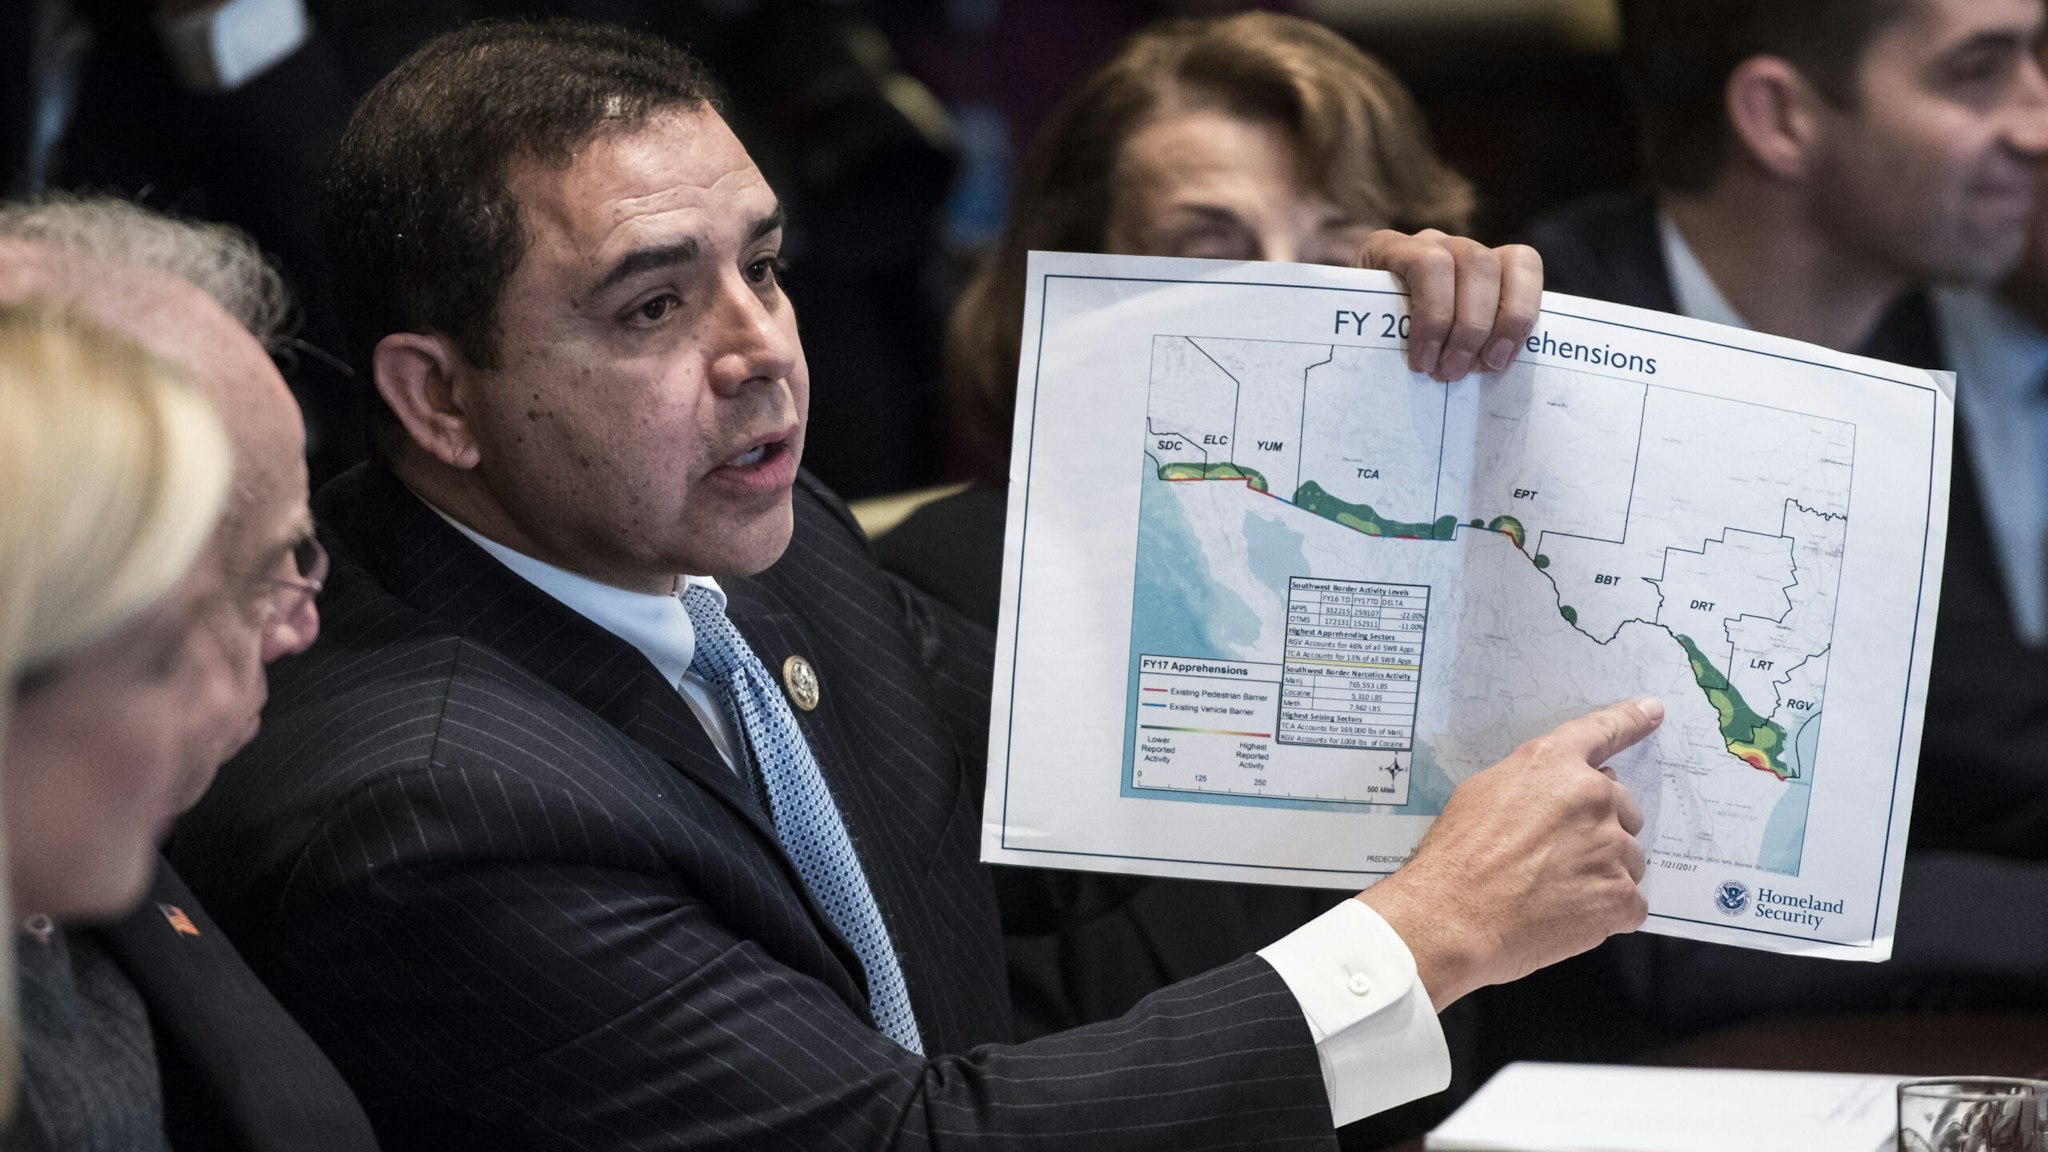 WASHINGTON, DC - JANUARY 9: Rep. Henry Cuellar, D-Texas, hold up a border map as he speaks during a meeting with lawmakers on immigration policy in the Cabinet Room at the White House in Washington, DC on Tuesday, Jan. 09, 2018.